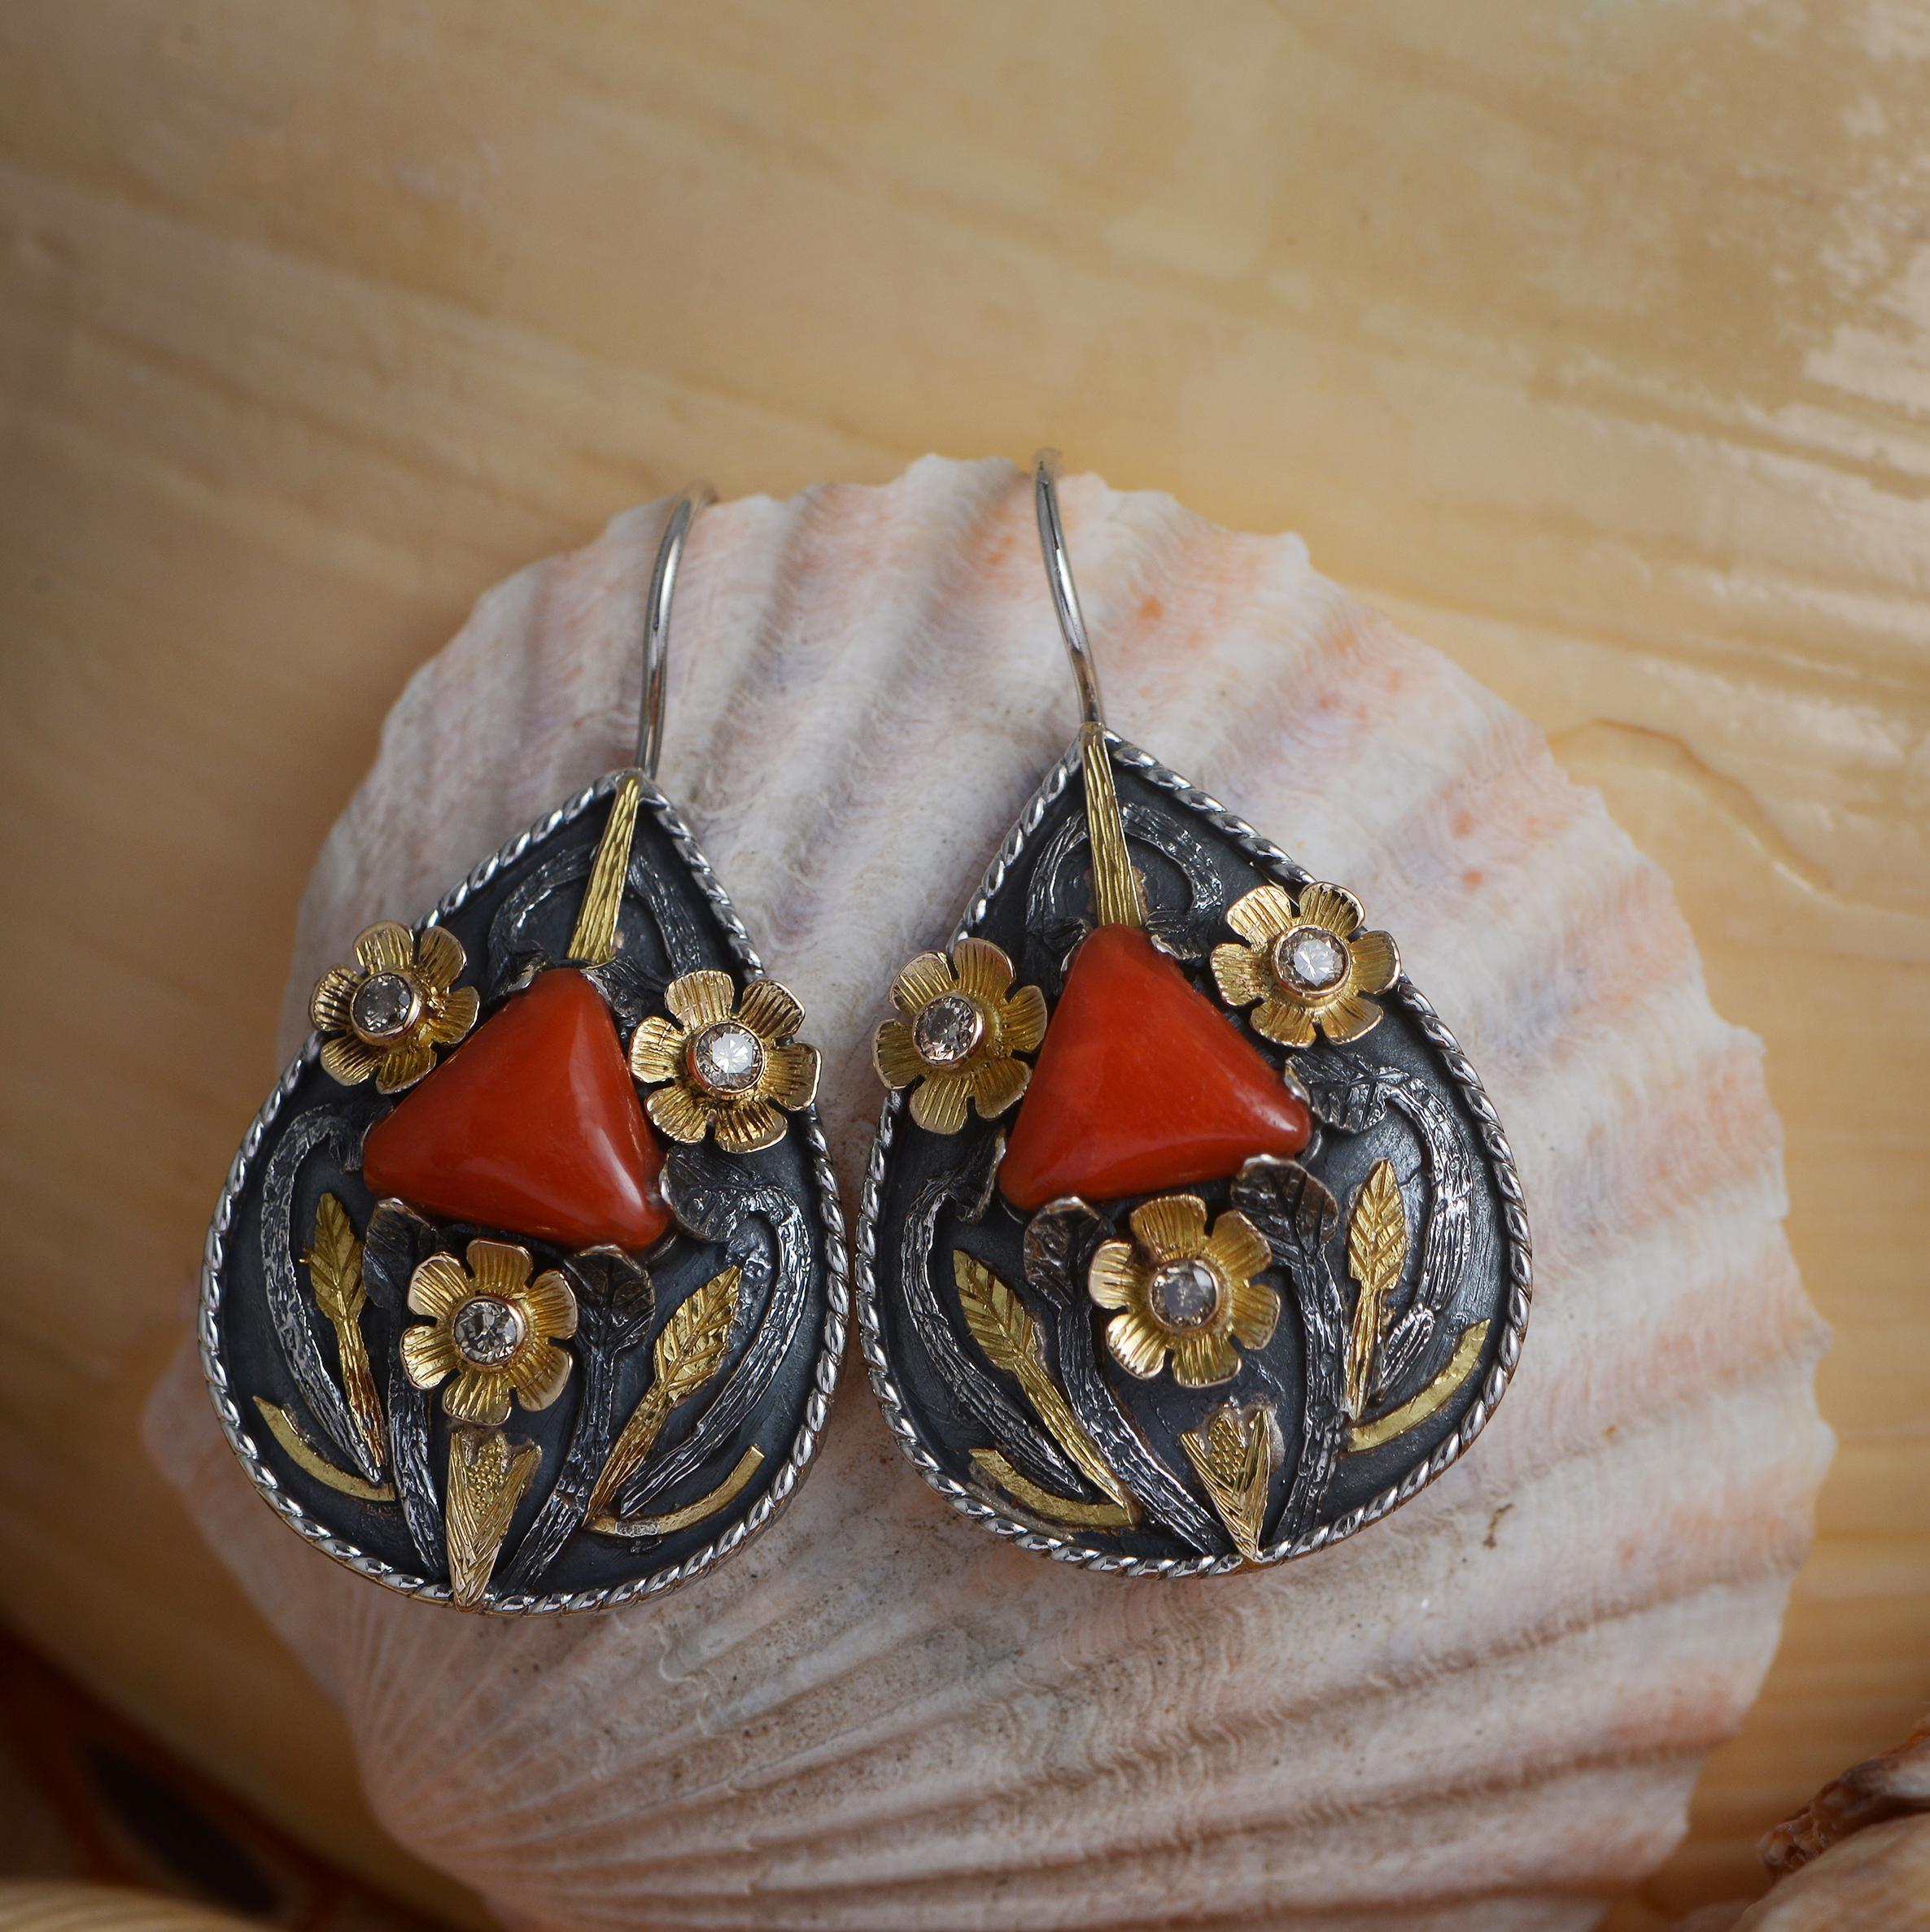 

These divine one of a kind earrings have been handmade in our workshops. We have used intricate hand engraving work using botanical motifs in 18kt gold and oxidized sterling silver, and embedded the earrings with coral and diamonds.

Earrings